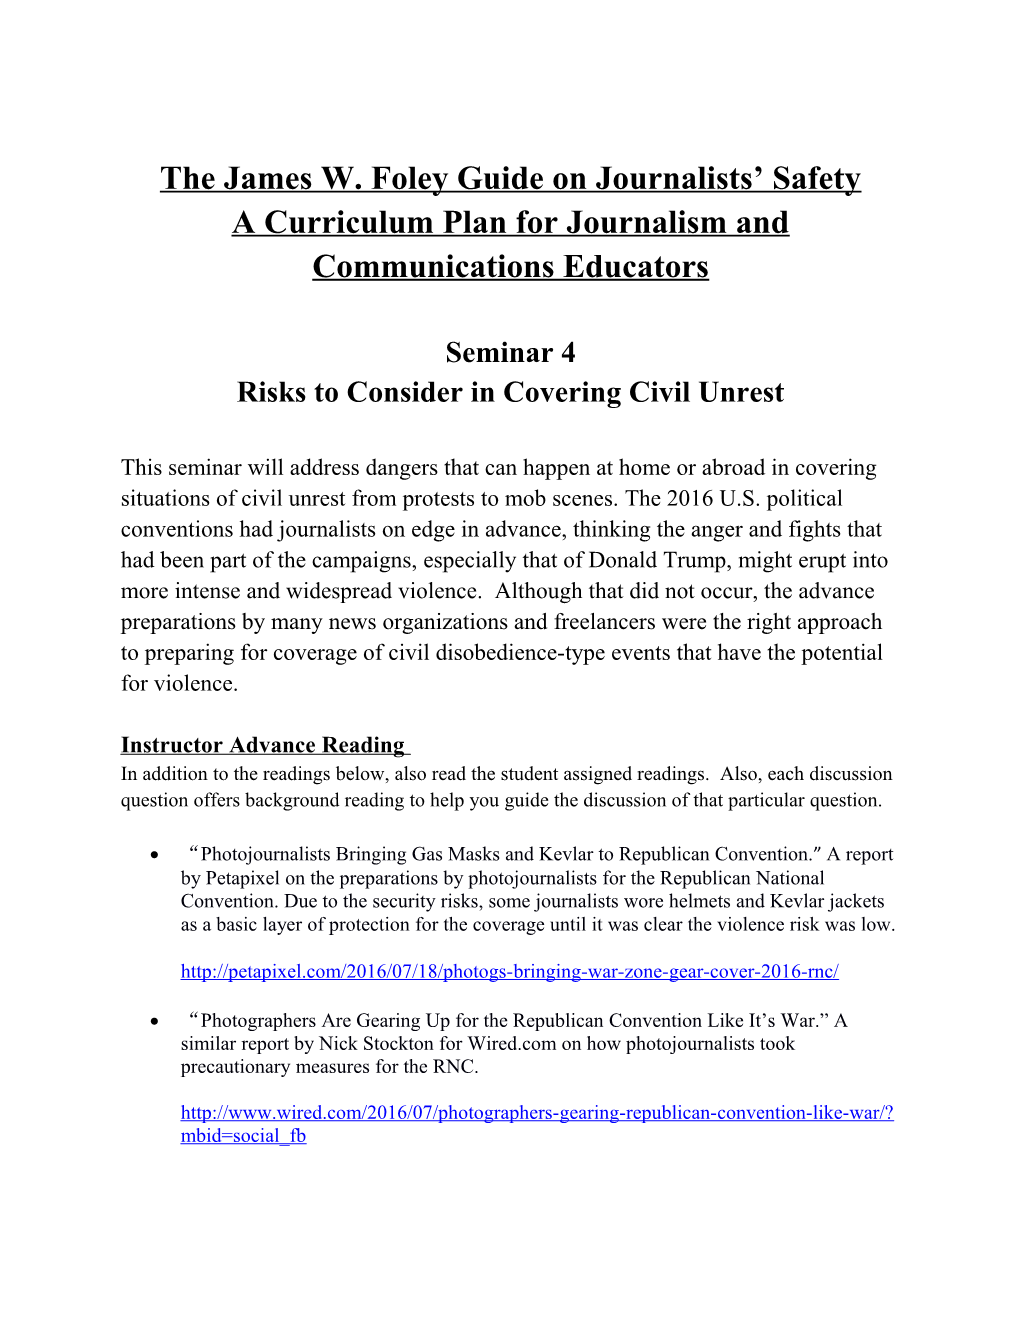 The James W. Foley Guide on Journalists Safety